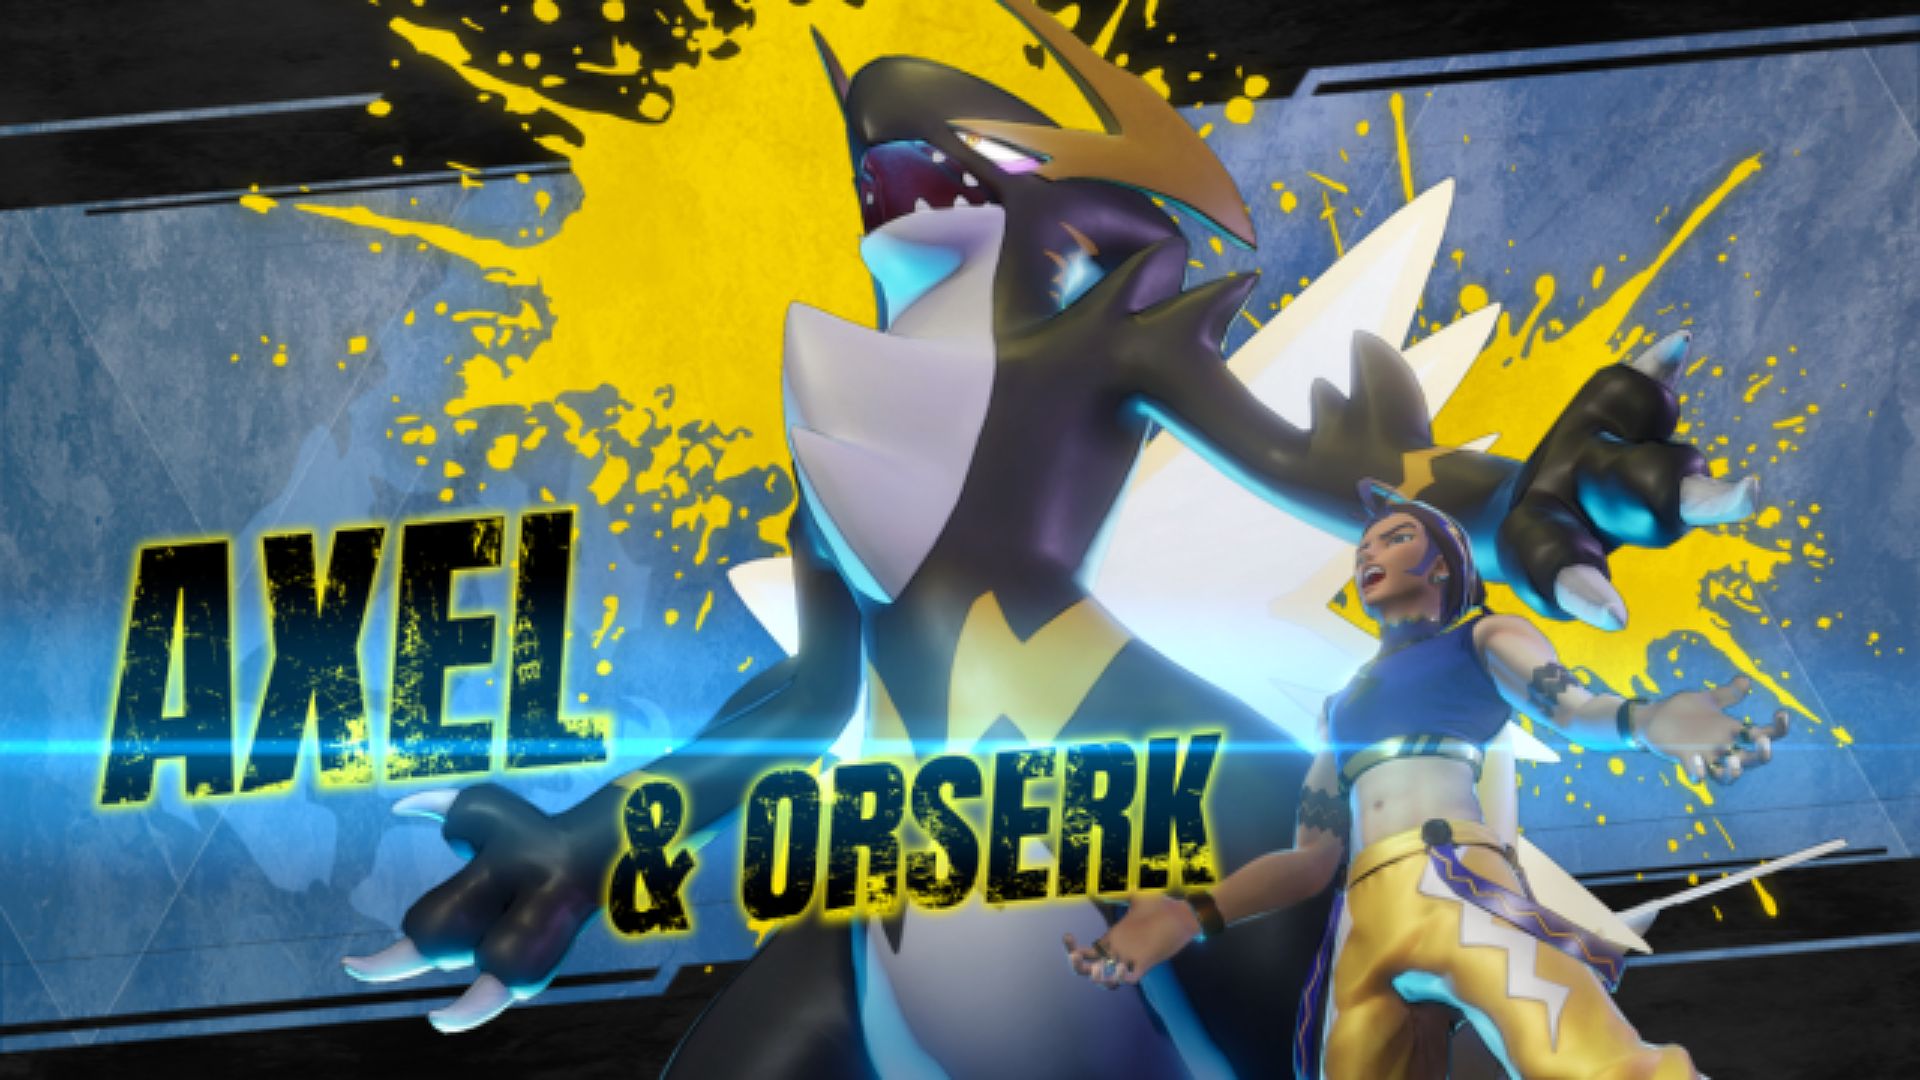 Axel and Orserk boss fight screen in Palworld